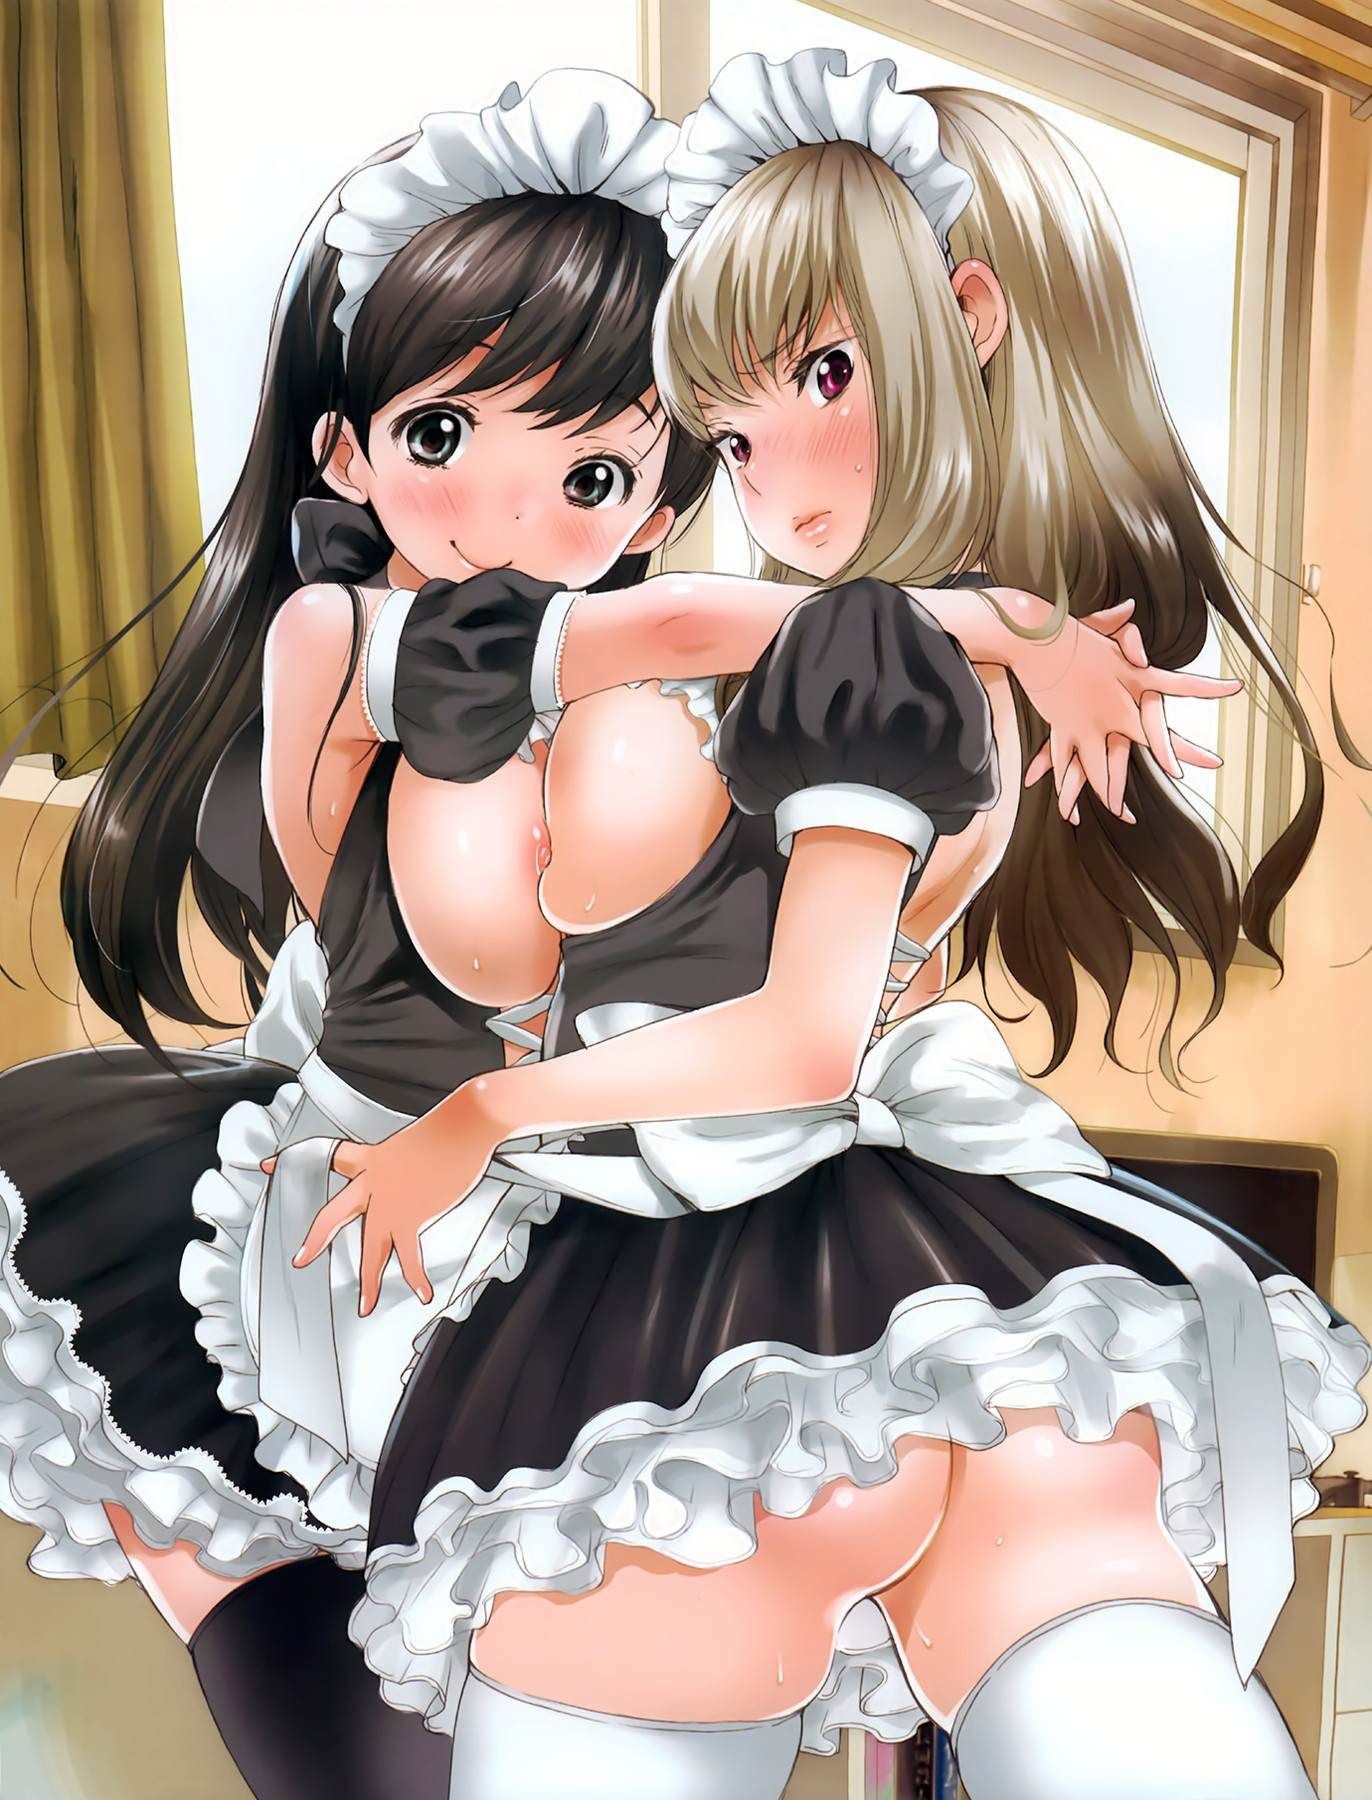 Erotic anime summary Erotic image of maid beauty and beautiful girl who seems to listen to instructions without problems [secondary erotic] 11